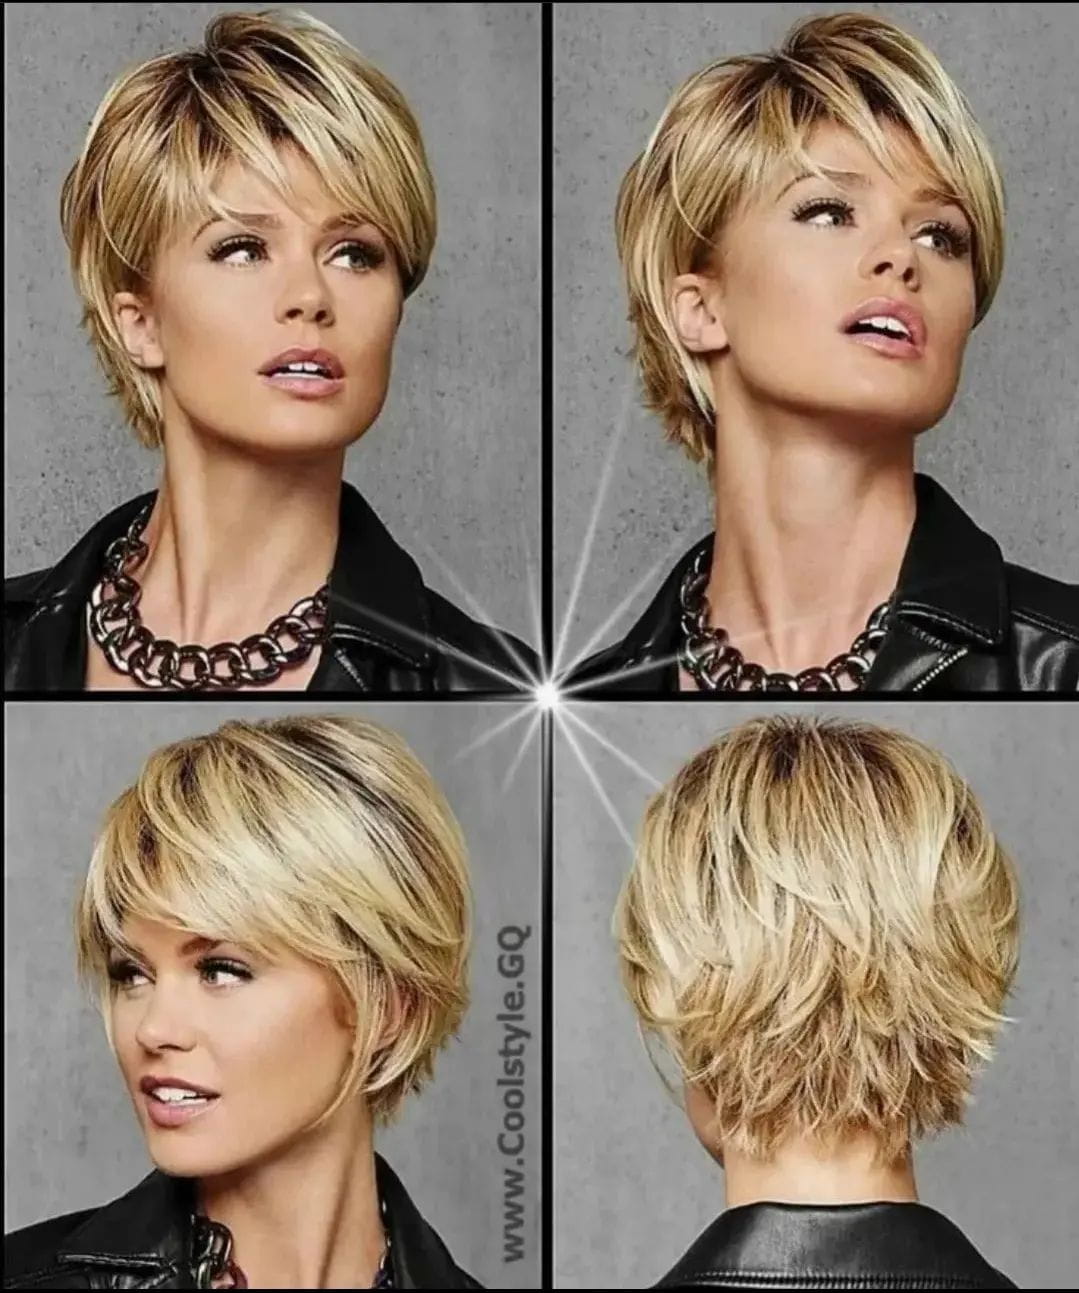 100+ Best Short Hairstyles & Haircuts For Women In 2023 images 86